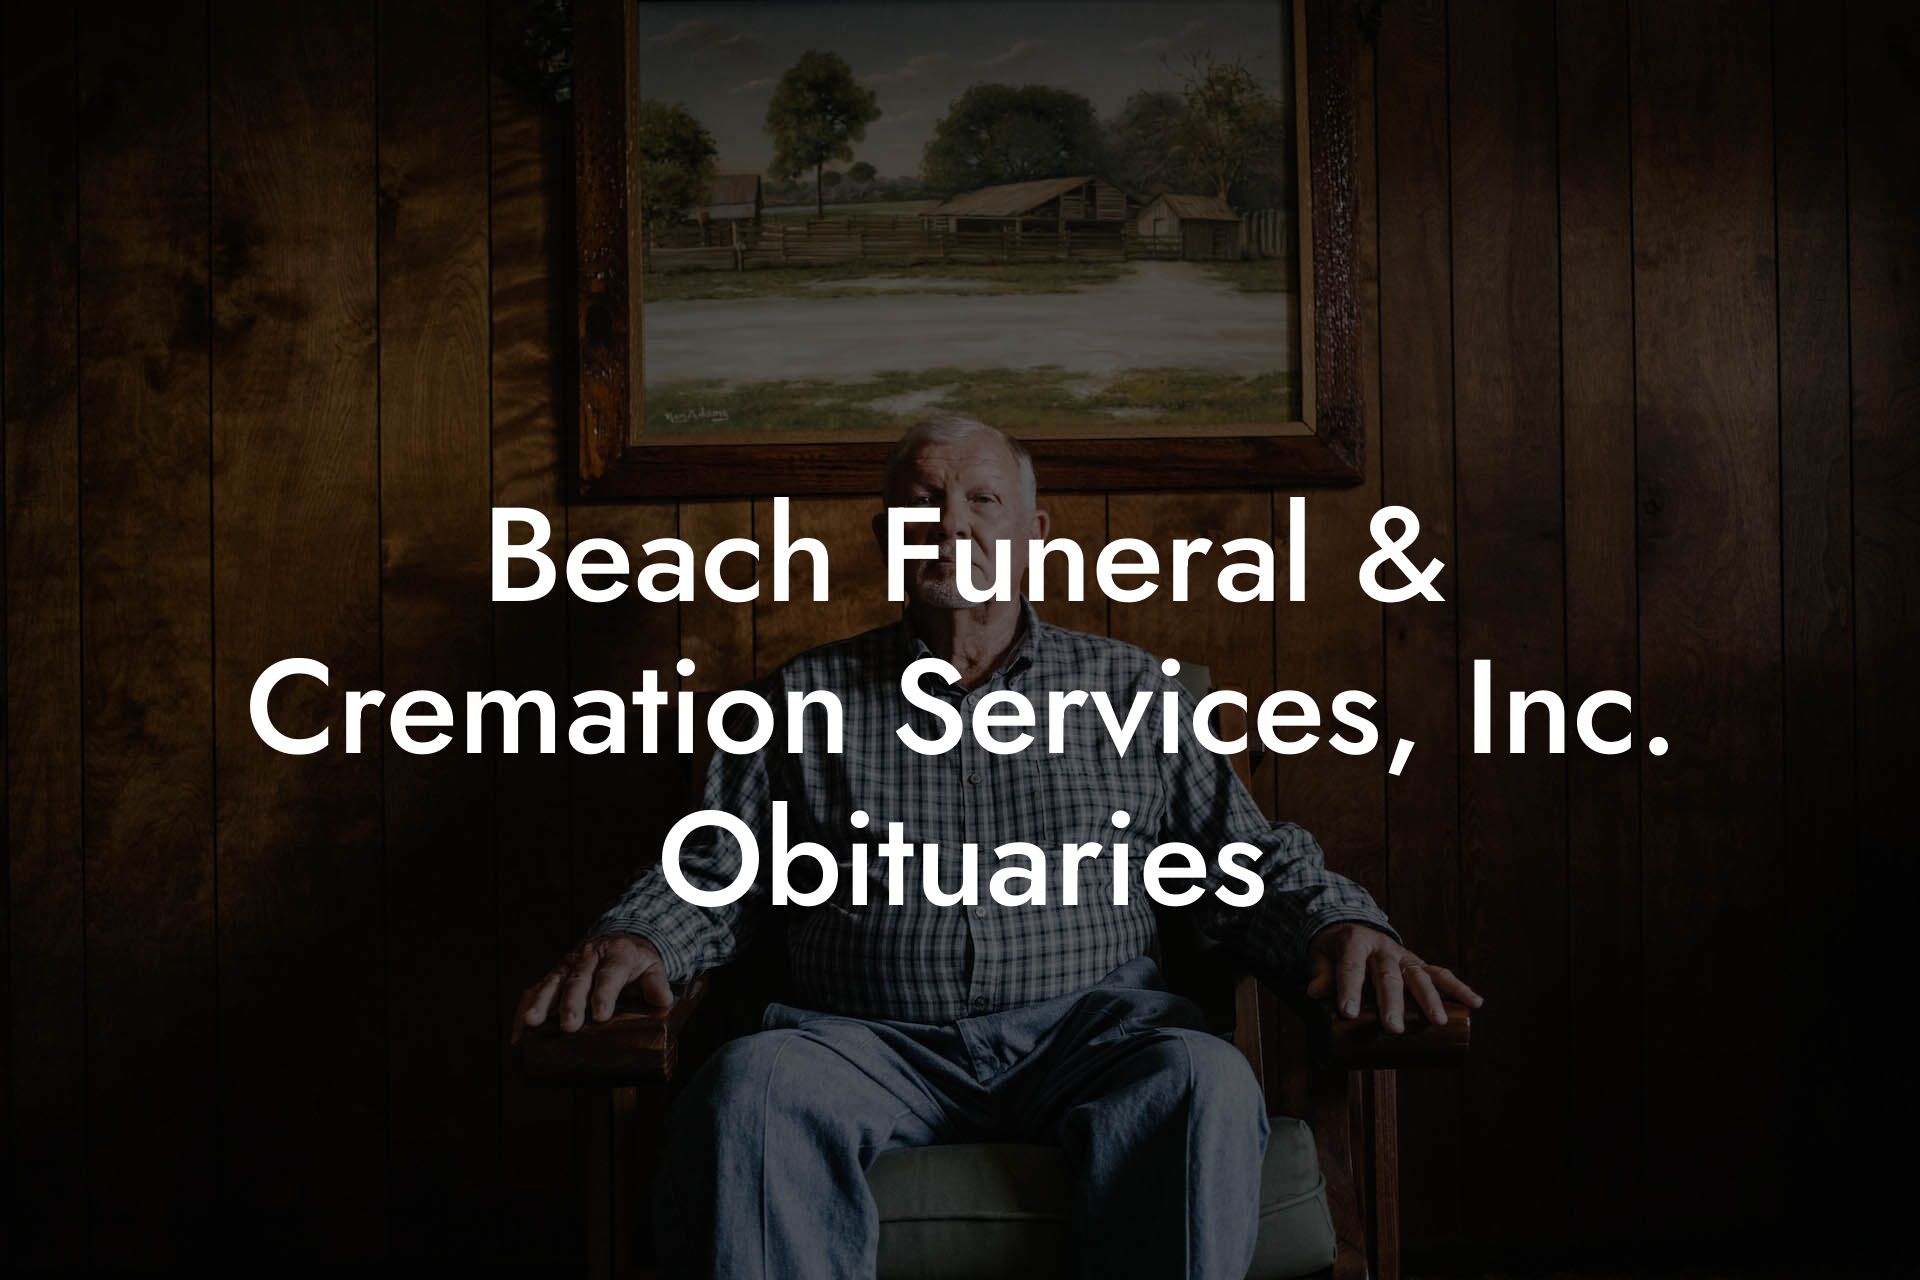 Beach Funeral & Cremation Services, Inc. Obituaries